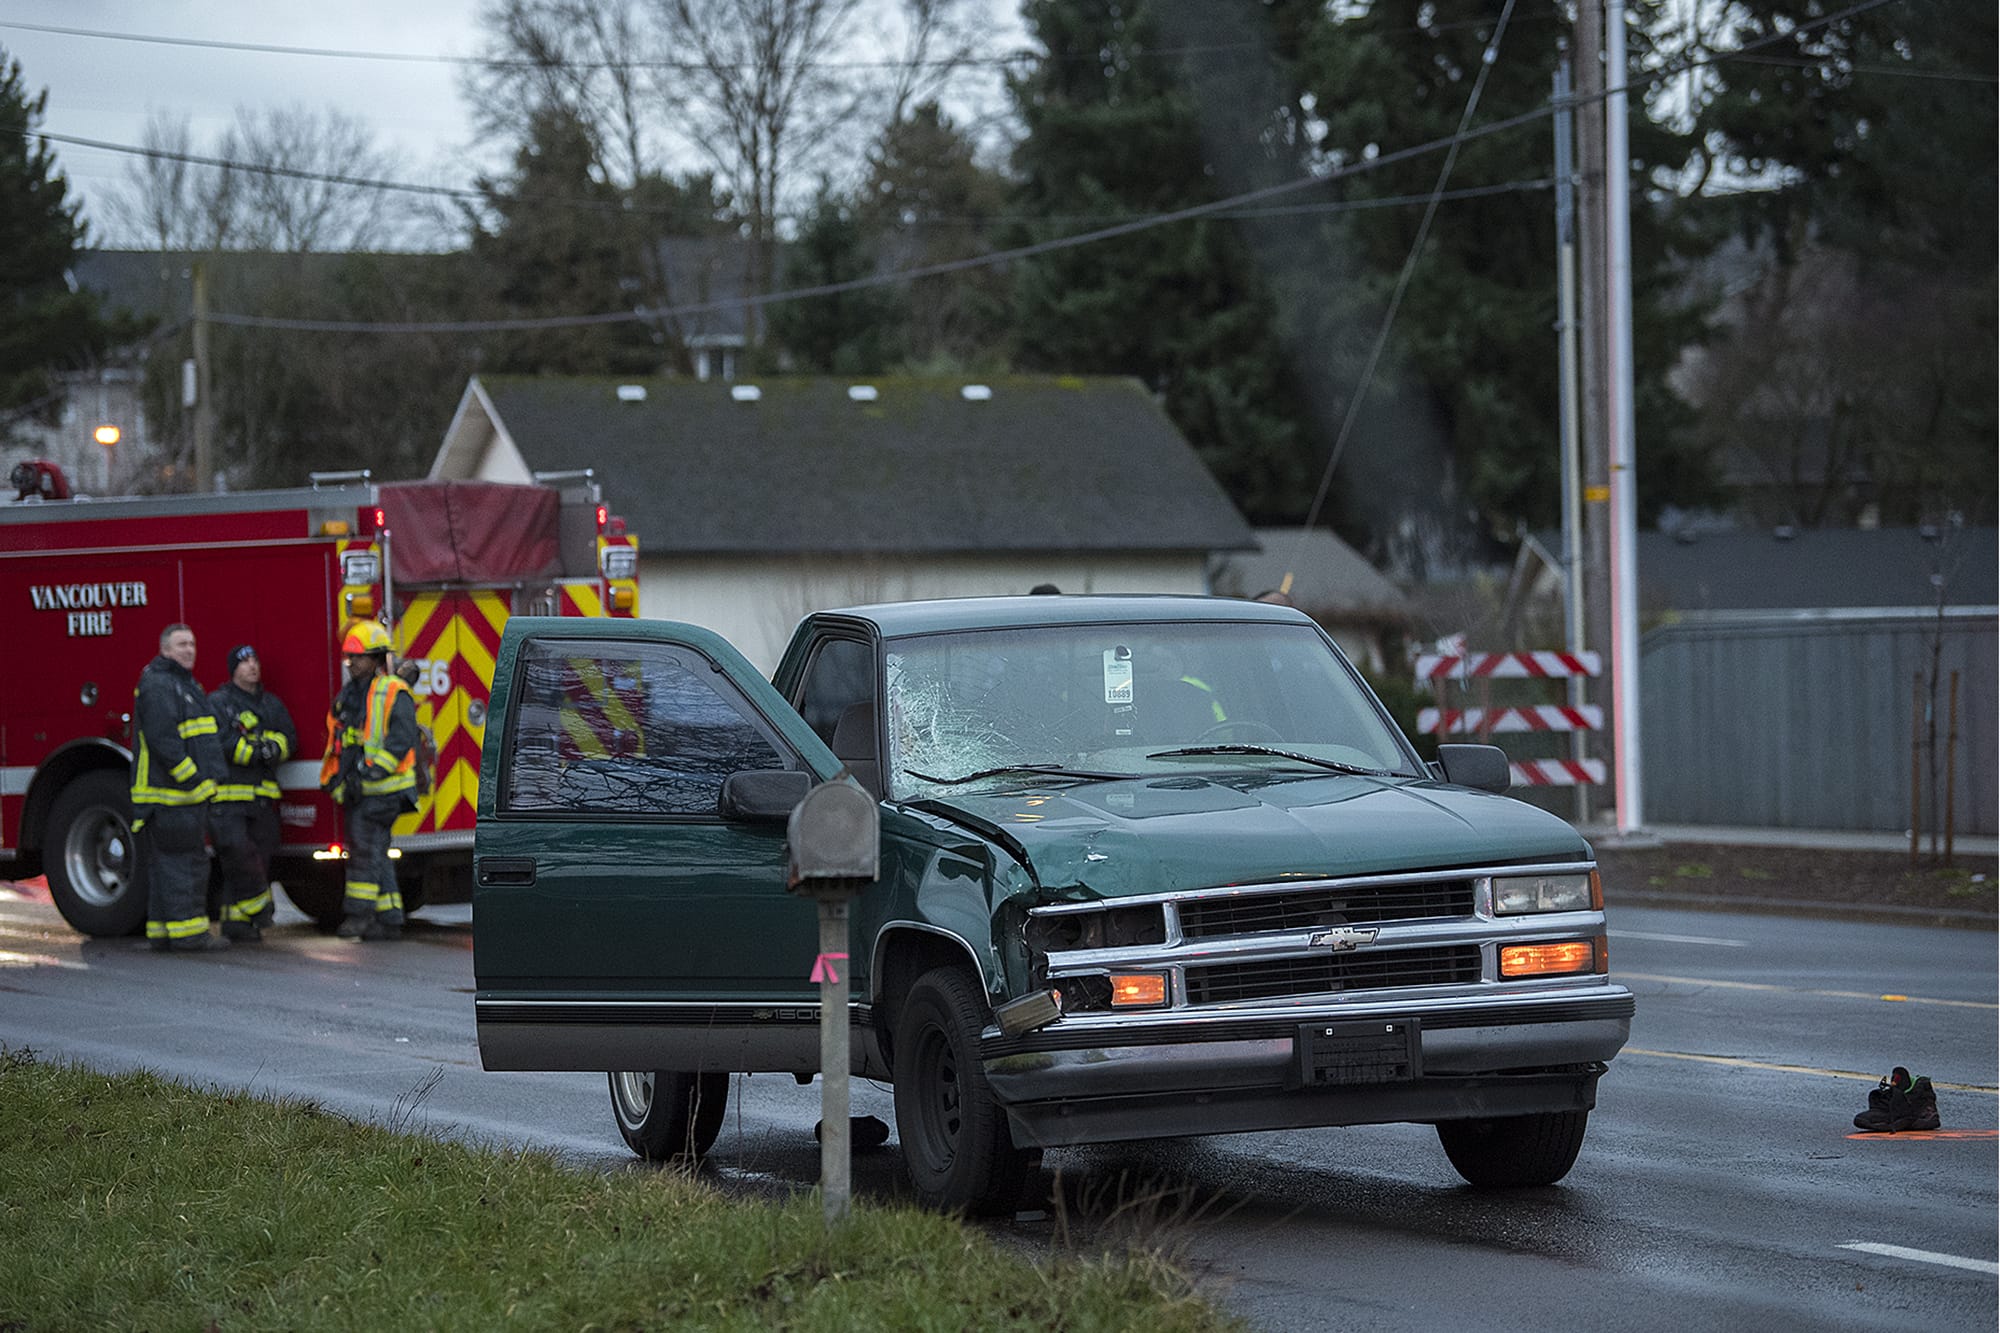 Police say a pickup was involved in the fatal pedestrian crash along Northeast 112th Avenue on Tuesday morning, Jan. 21, 2020.